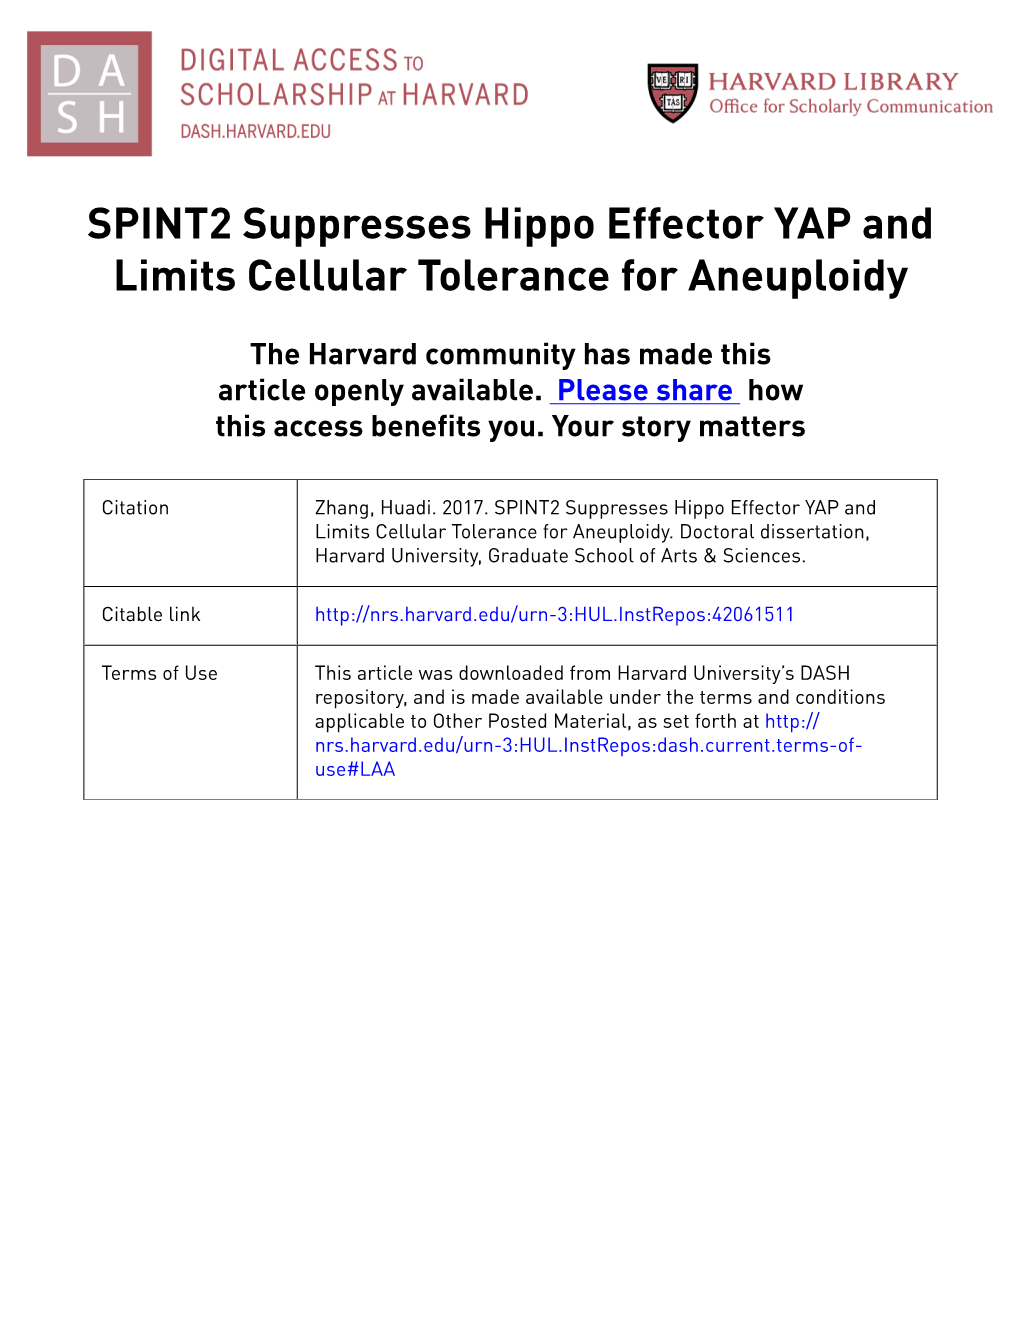 SPINT2 Suppresses Hippo Effector YAP and Limits Cellular Tolerance for Aneuploidy